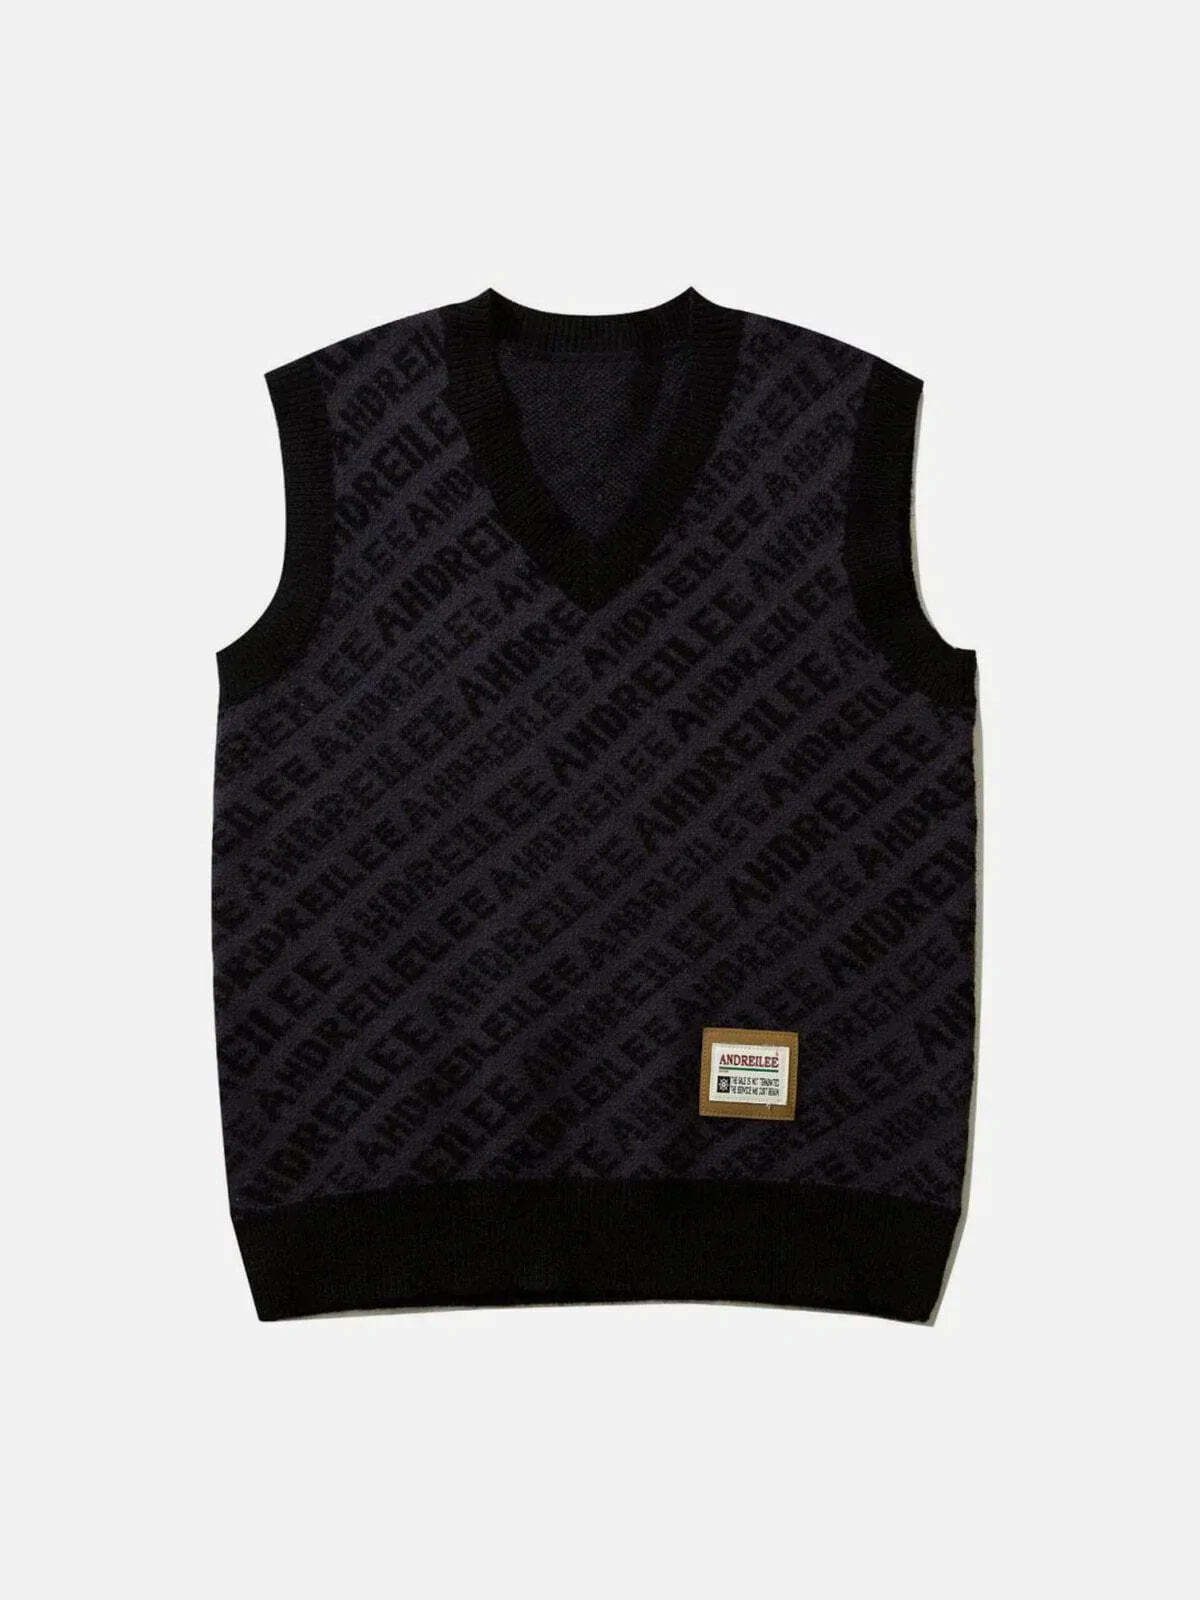 graphic letter print sweater vest edgy y2k streetwear 3412